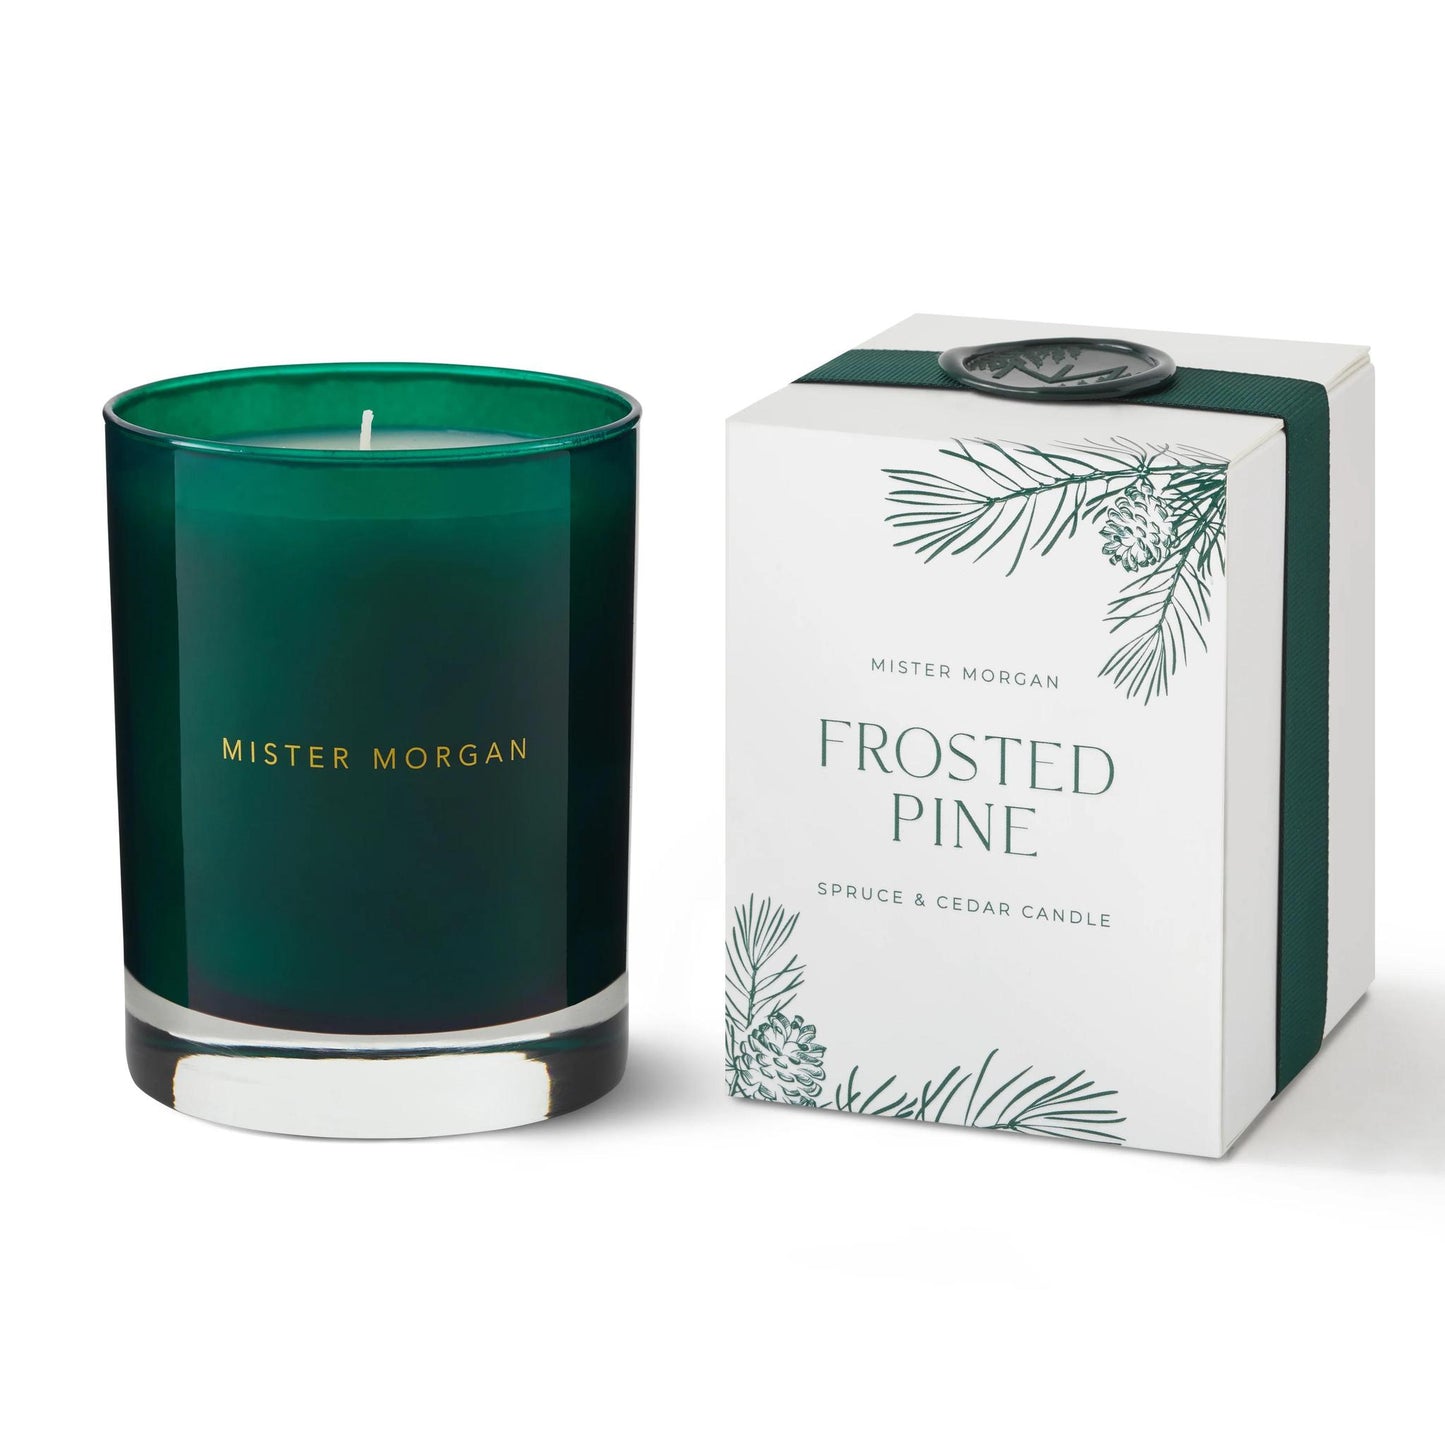 NM Frosted Pine Candle 11 oz